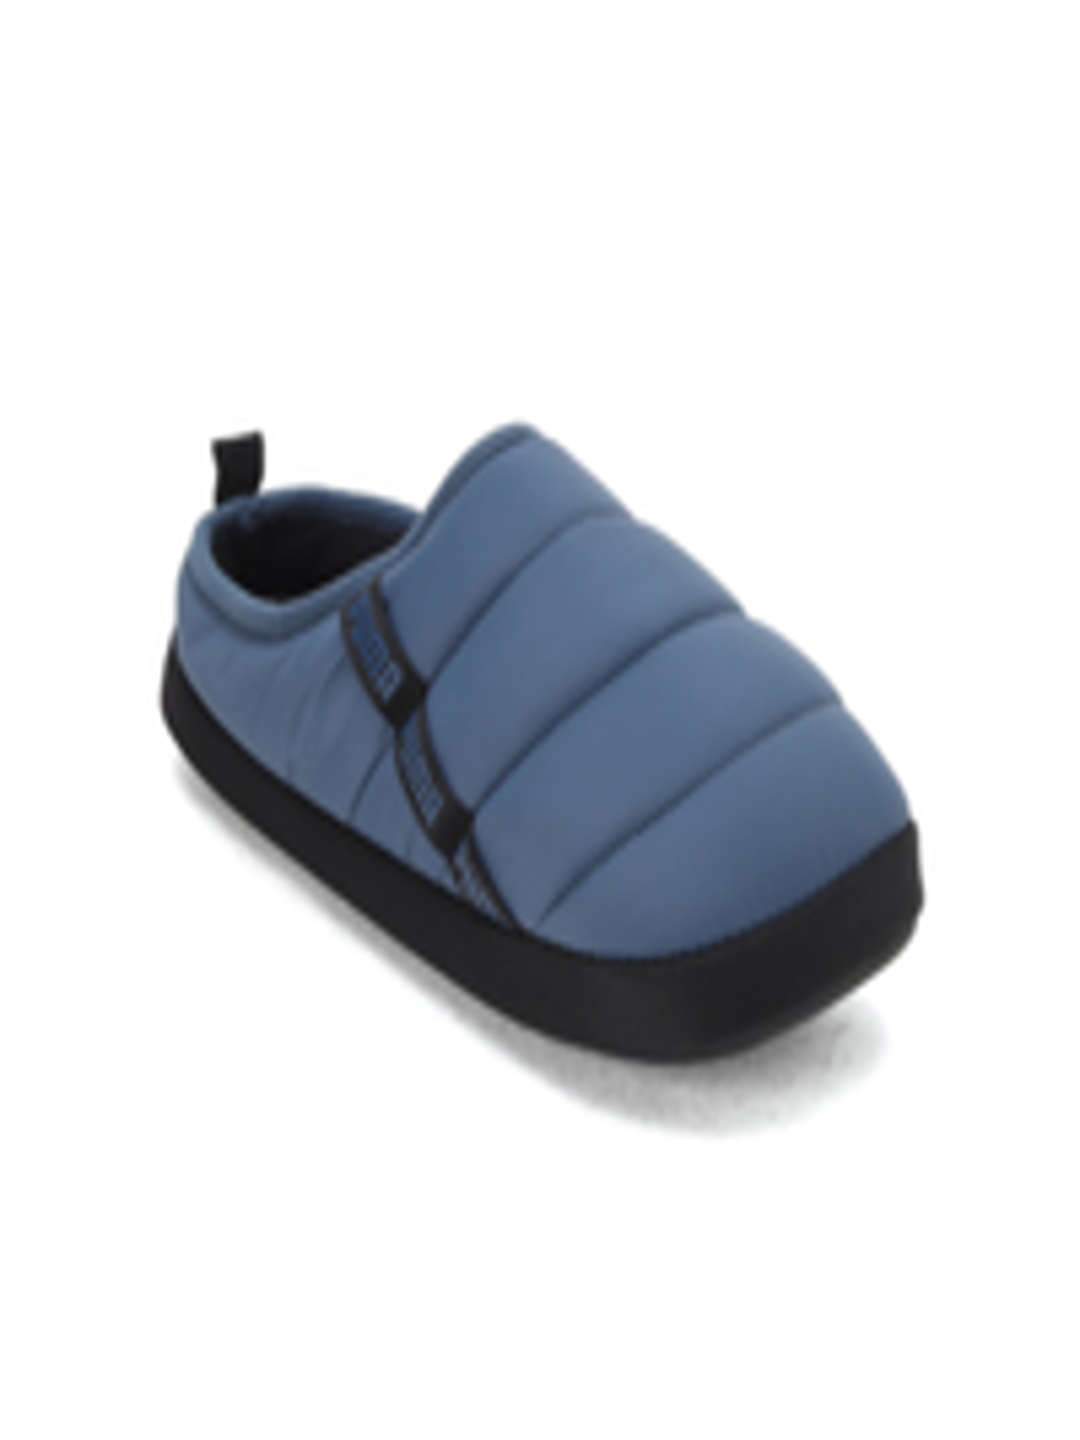 Buy Puma Unisex Scuff Clogs - Casual Shoes for Unisex 24190134 | Myntra